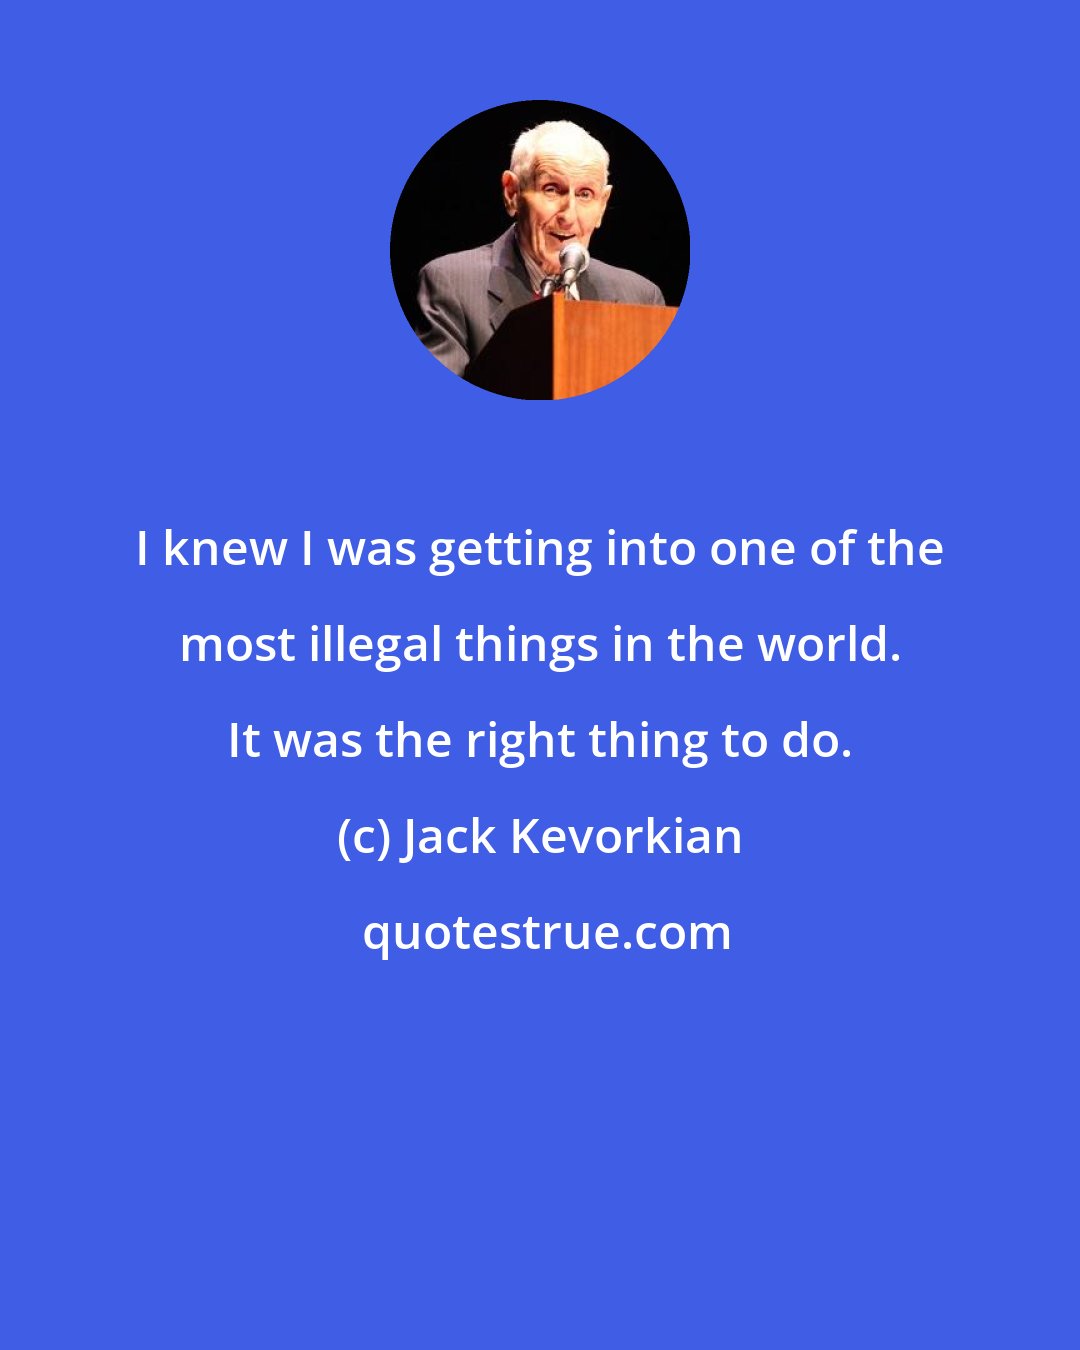 Jack Kevorkian: I knew I was getting into one of the most illegal things in the world. It was the right thing to do.